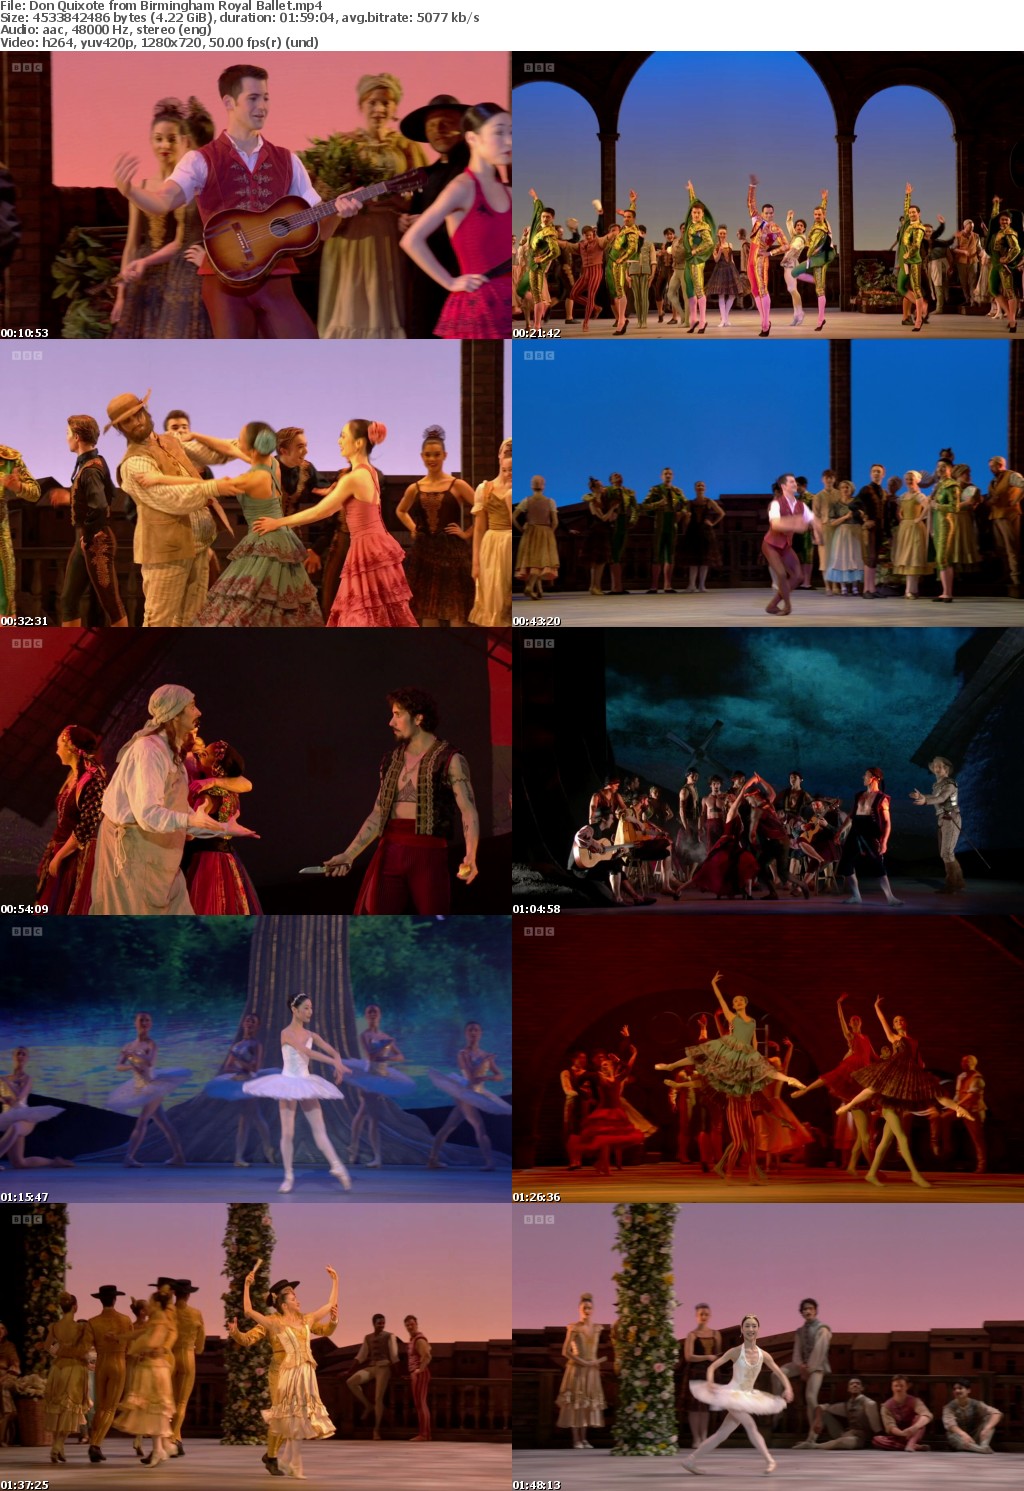 Don Quixote from Birmingham Royal Ballet (1280x720p HD, 50fps, soft Eng subs) Birmingham Royal Ballet perform Don Quixote in a production by Carlos Acosta / / Based on Spain #039;s most famous novel, the classic ballet follows Don Quixote #039;s ex